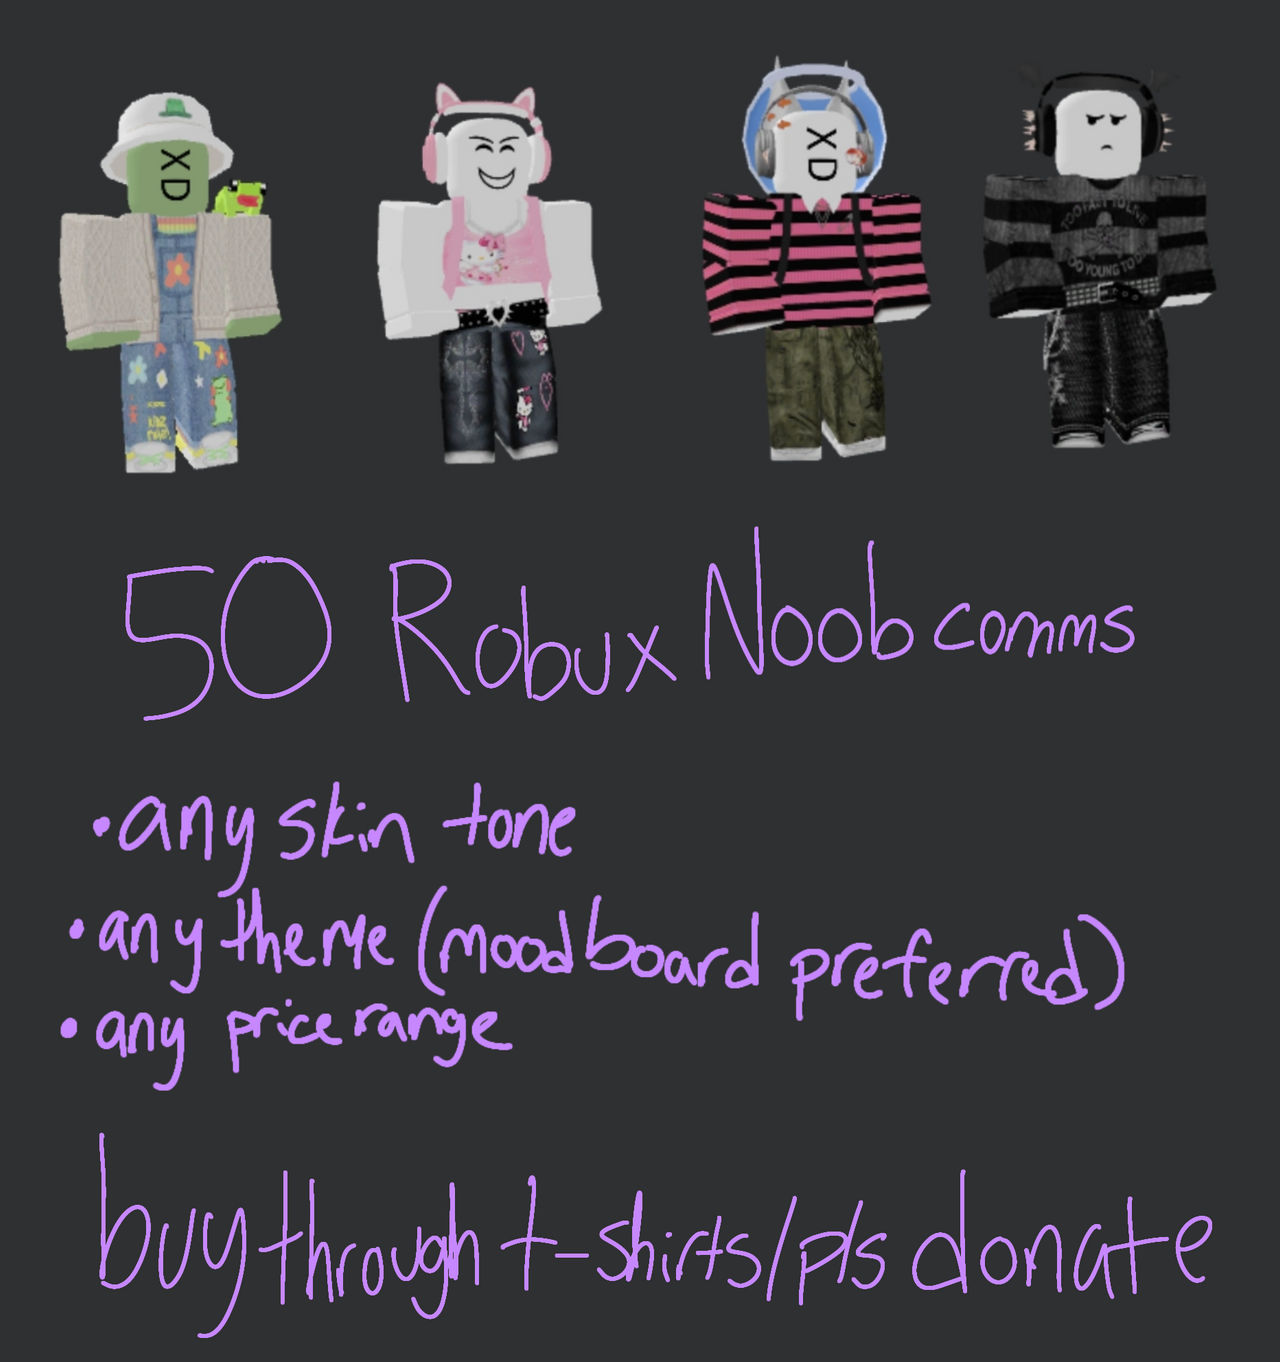 50 Robux Outfits – Roblox Outfits